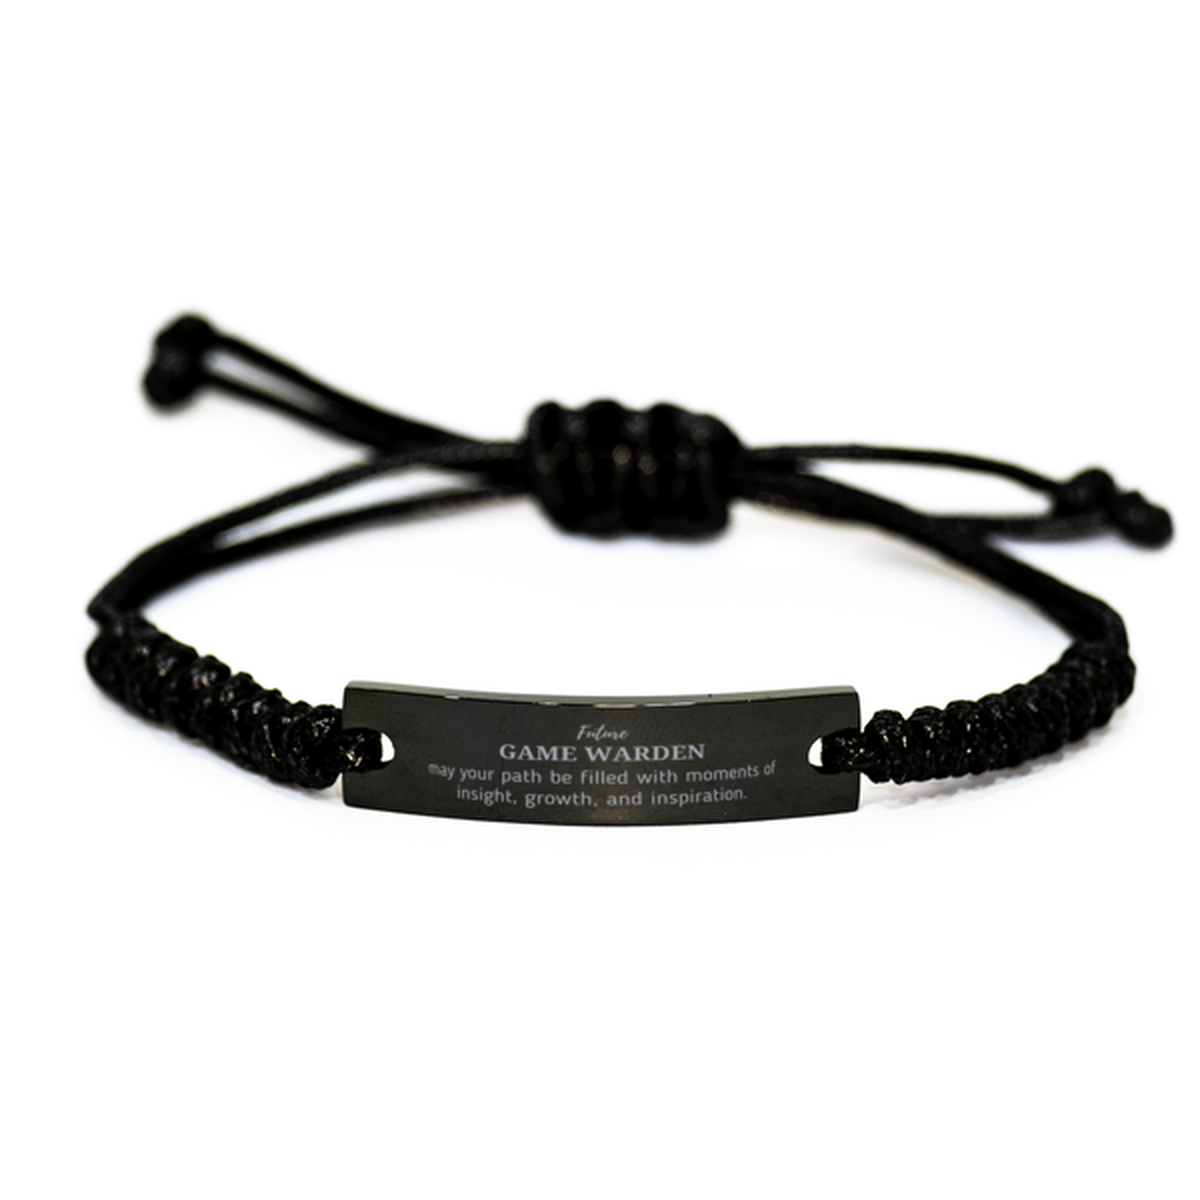 Future Game Warden Gifts, May your path be filled with moments of insight, Graduation Gifts for New Game Warden, Christmas Unique Black Rope Bracelet For Men, Women, Friends